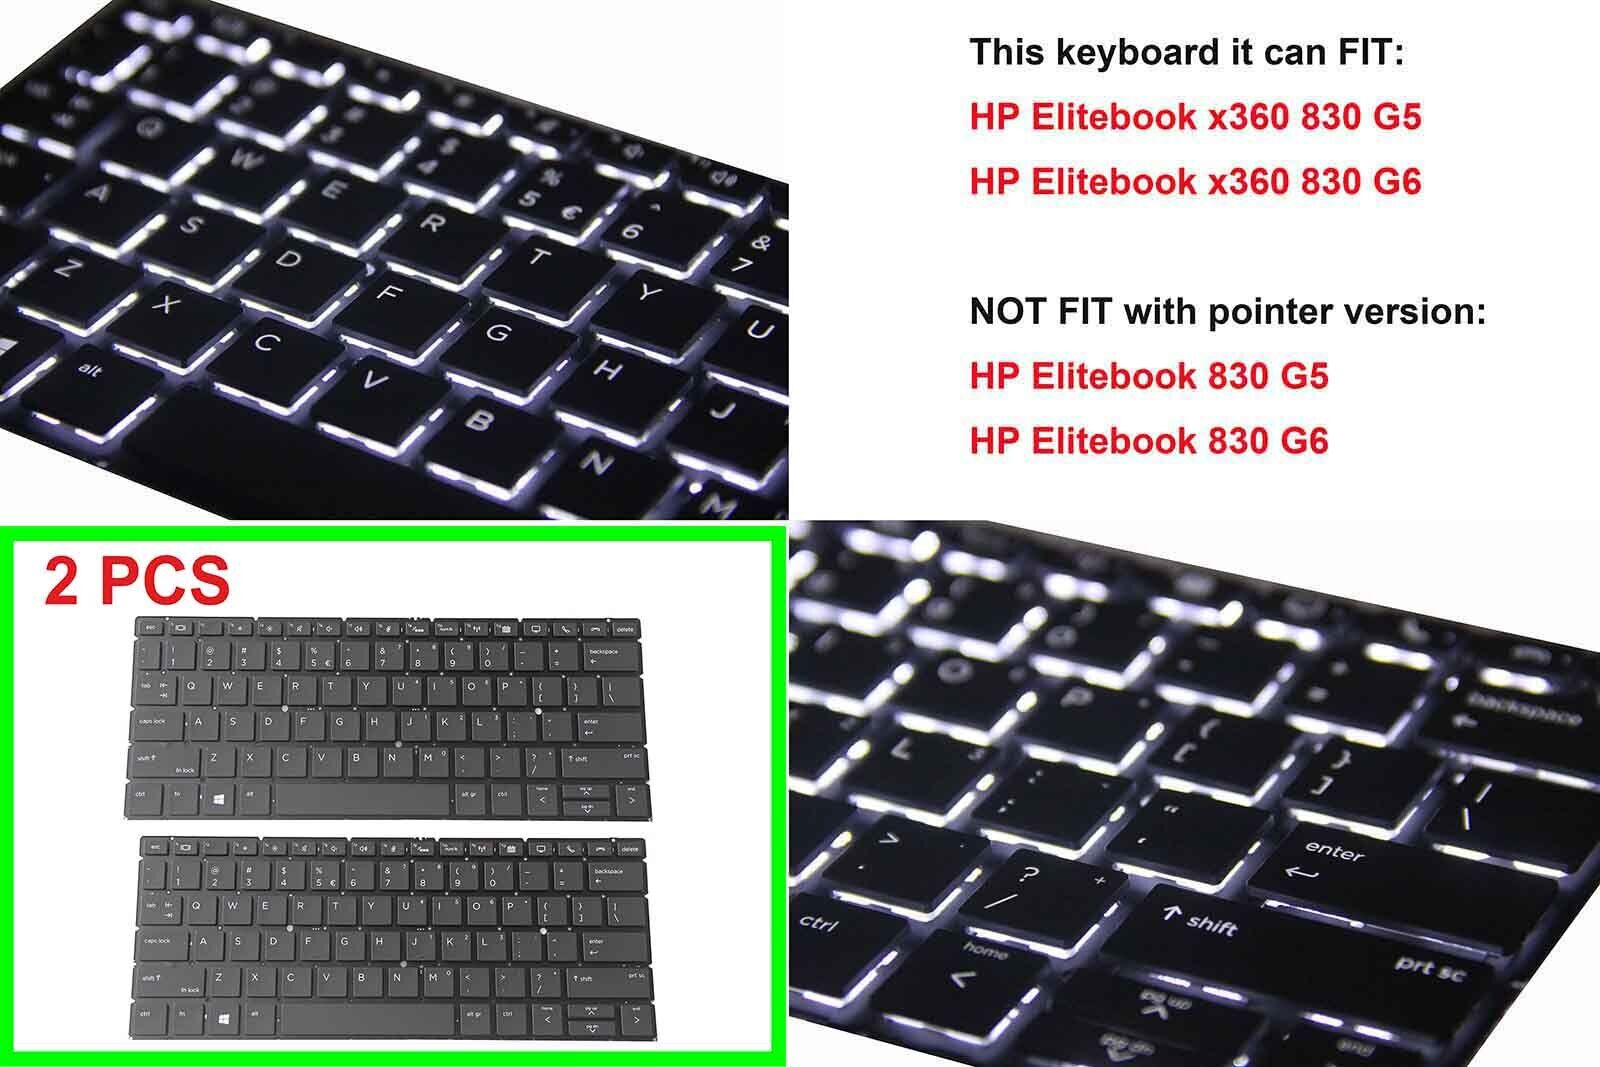 2pcs Durable US Keyboard for HP EliteBook x360 830 G5,x360 830 G6 2-in-1 Backlit